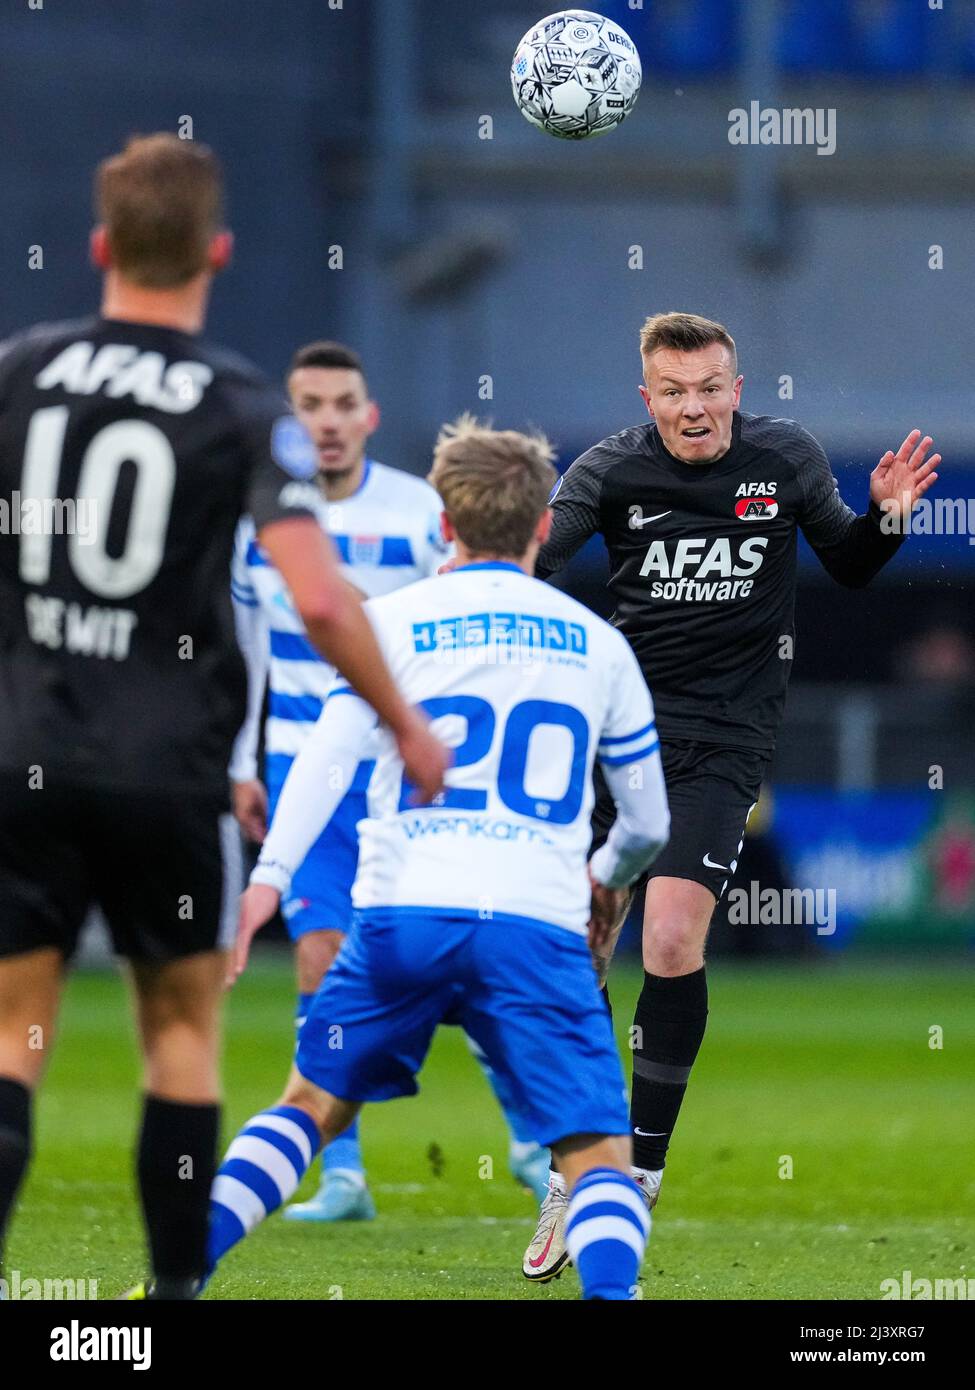 ZWOLLE - Jordy Clasie of AZ Alkmaar during the Dutch Eredivisie match between PEC Zwolle and AZ at the MAC3Park stadium on April 10, 2022 in Zwolle, Netherlands. ANP ED OF THE POL Stock Photo